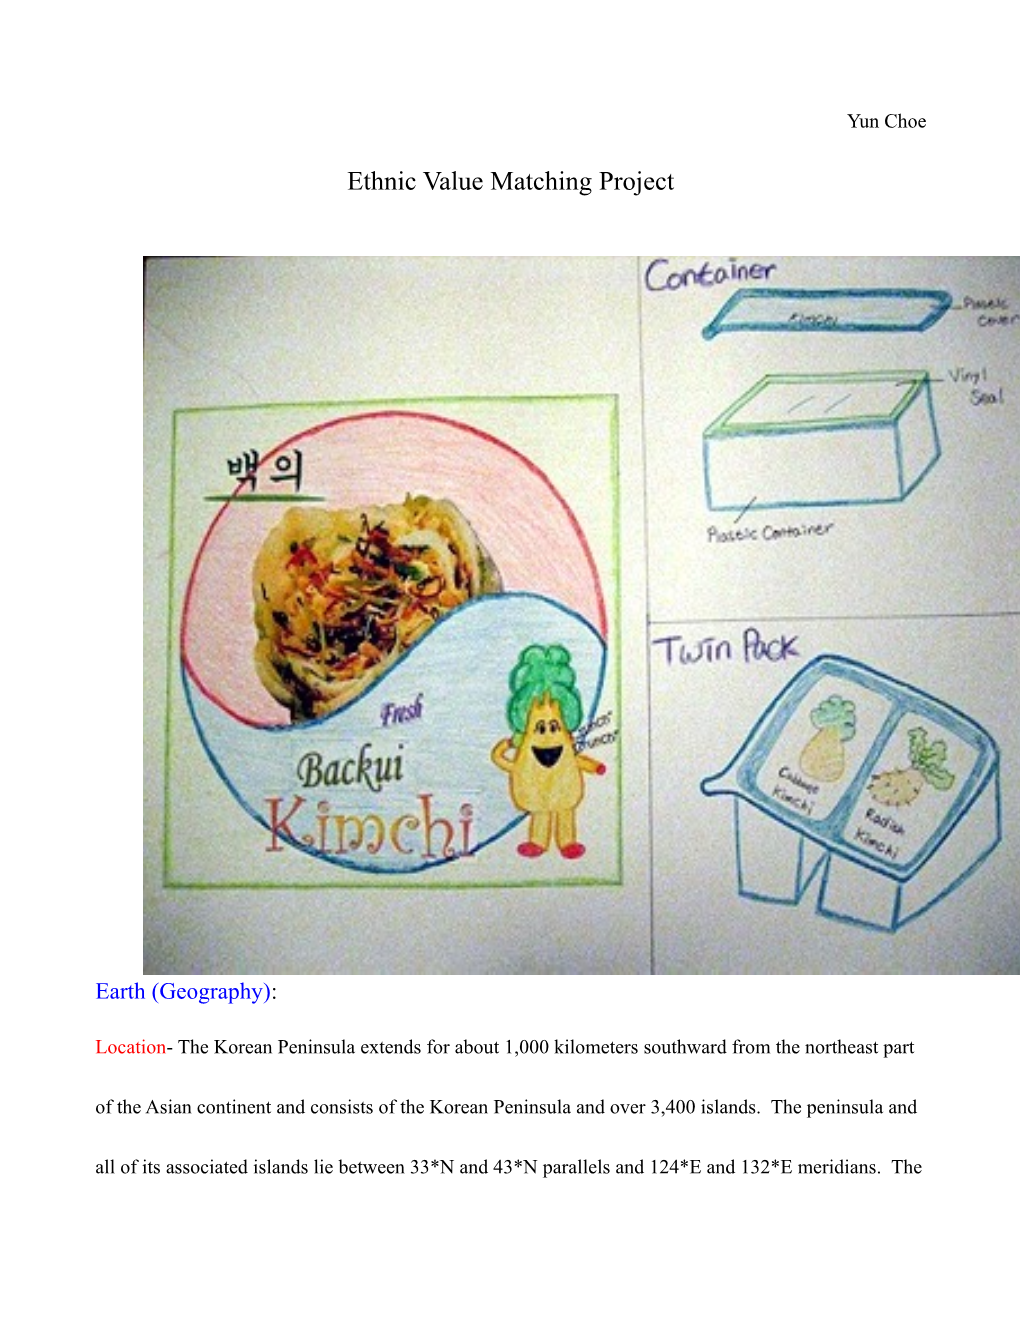 Ethnic Value Matching Project